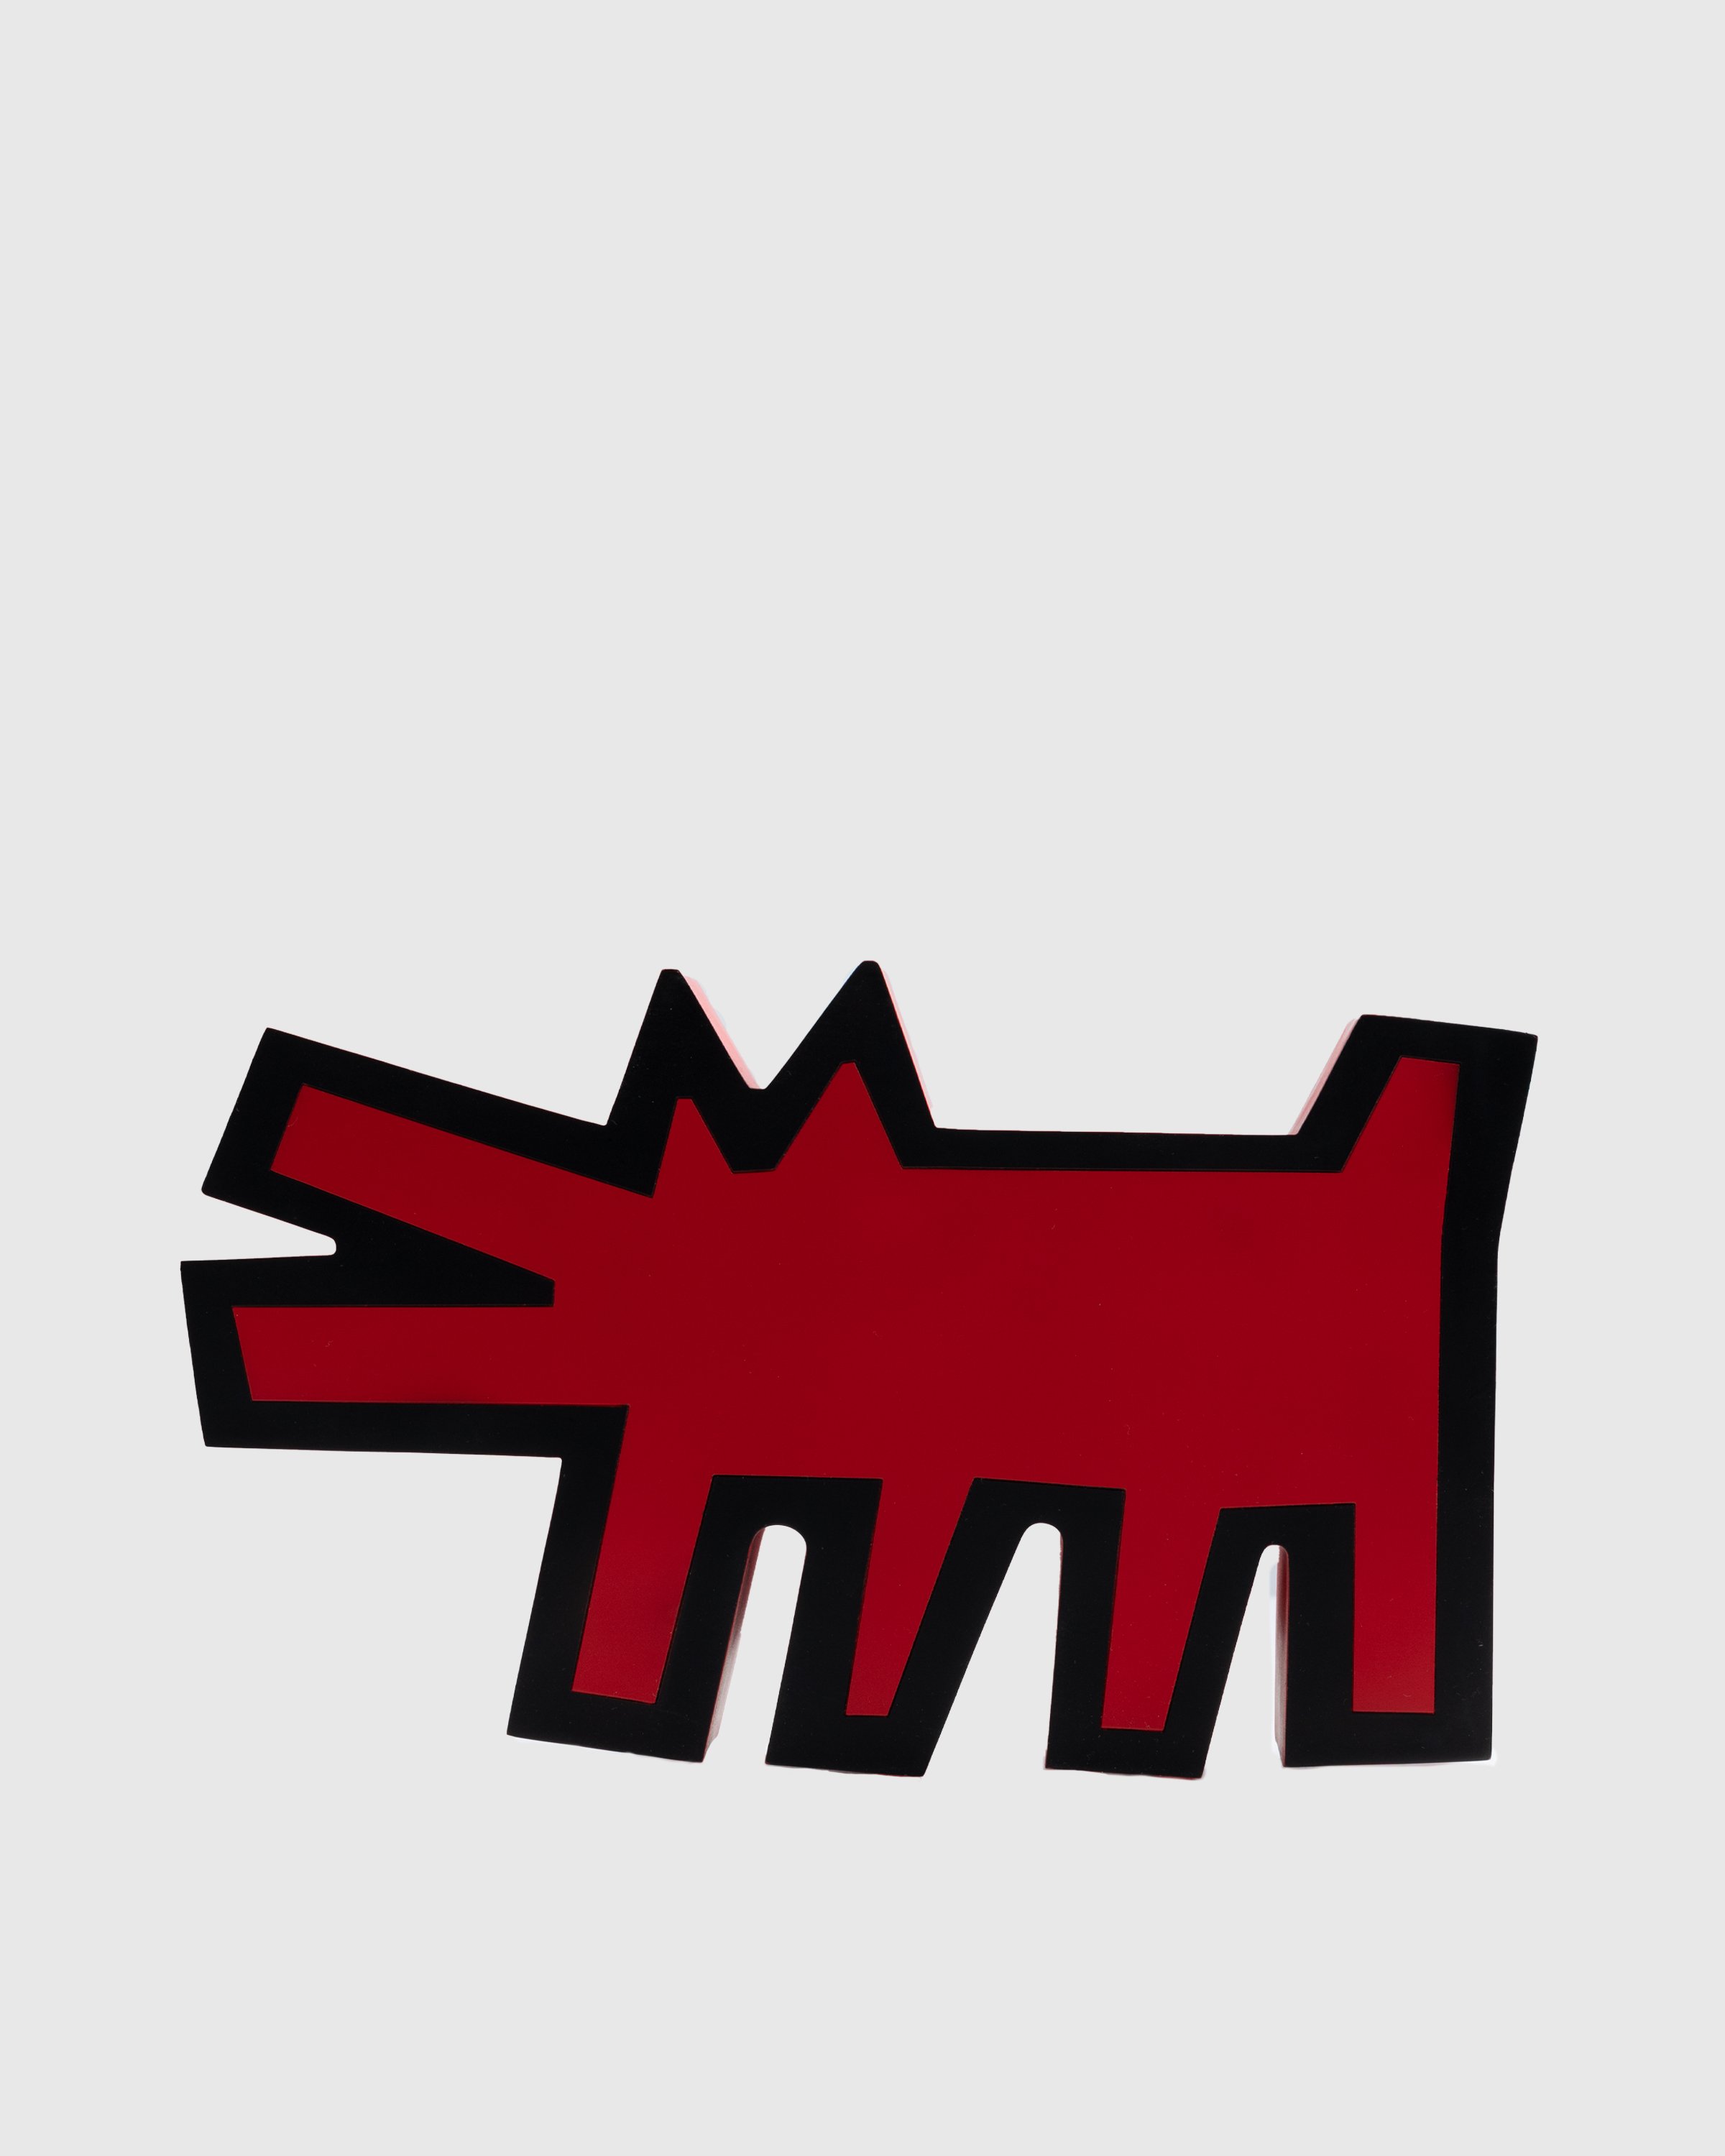 Medicom - Keith Haring Barking Dog Statue Red - Lifestyle - Red - Image 1